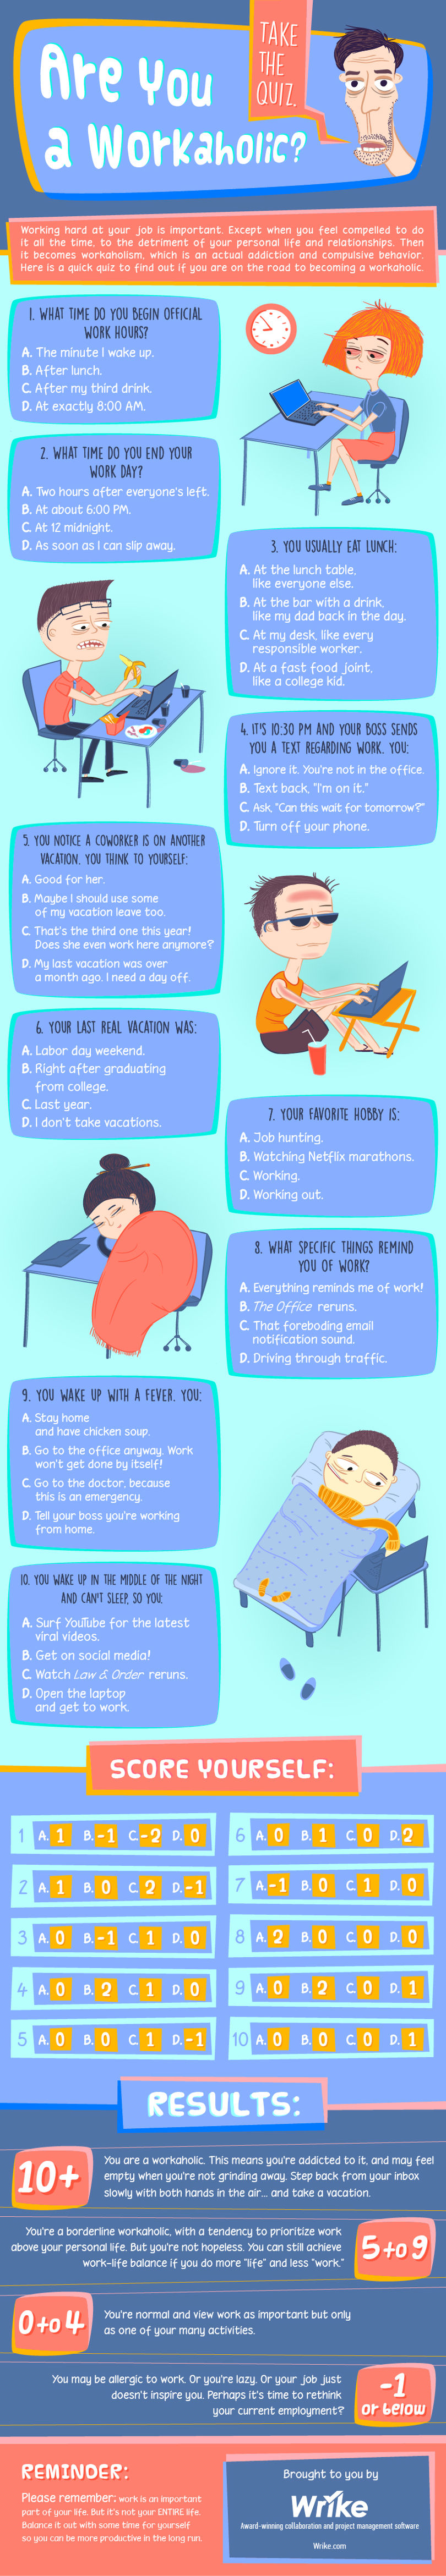 Are you a workaholic - infographic by Wrike